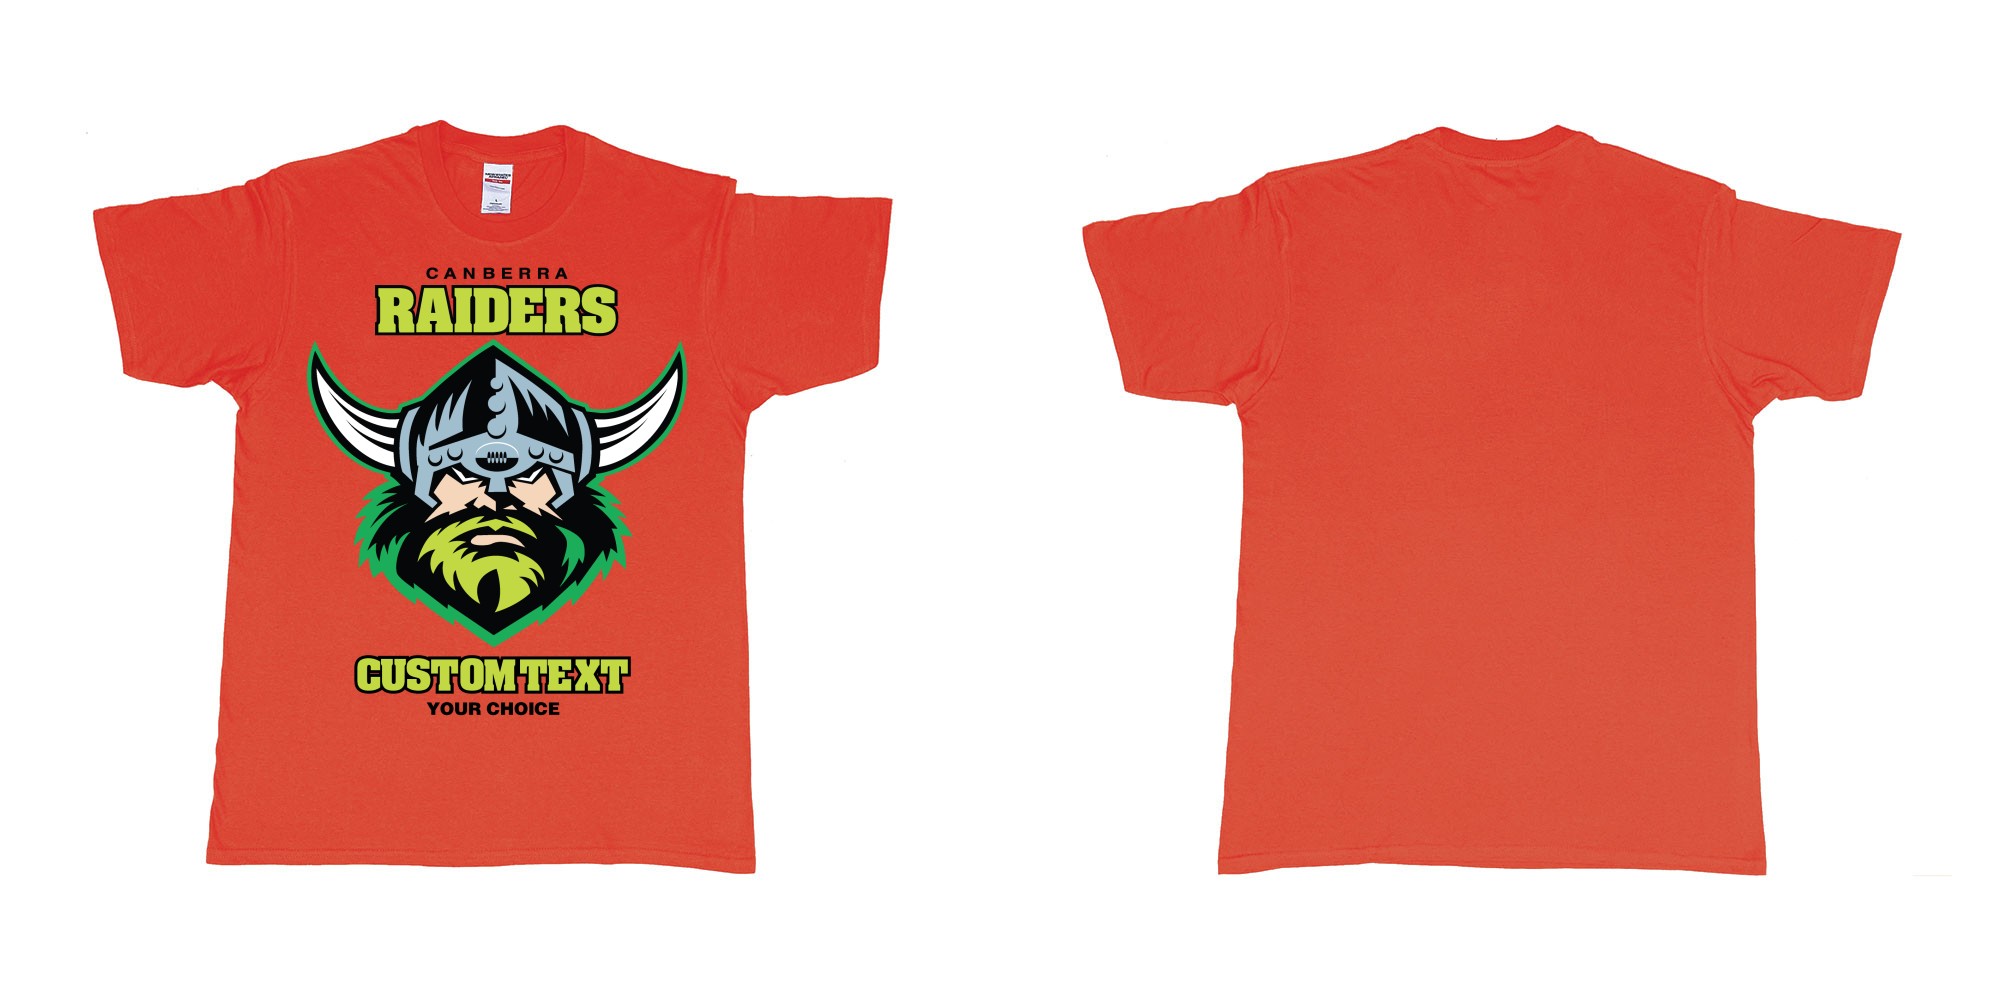 Custom tshirt design canberra raiders nrl logo own printed text near you in fabric color red choice your own text made in Bali by The Pirate Way